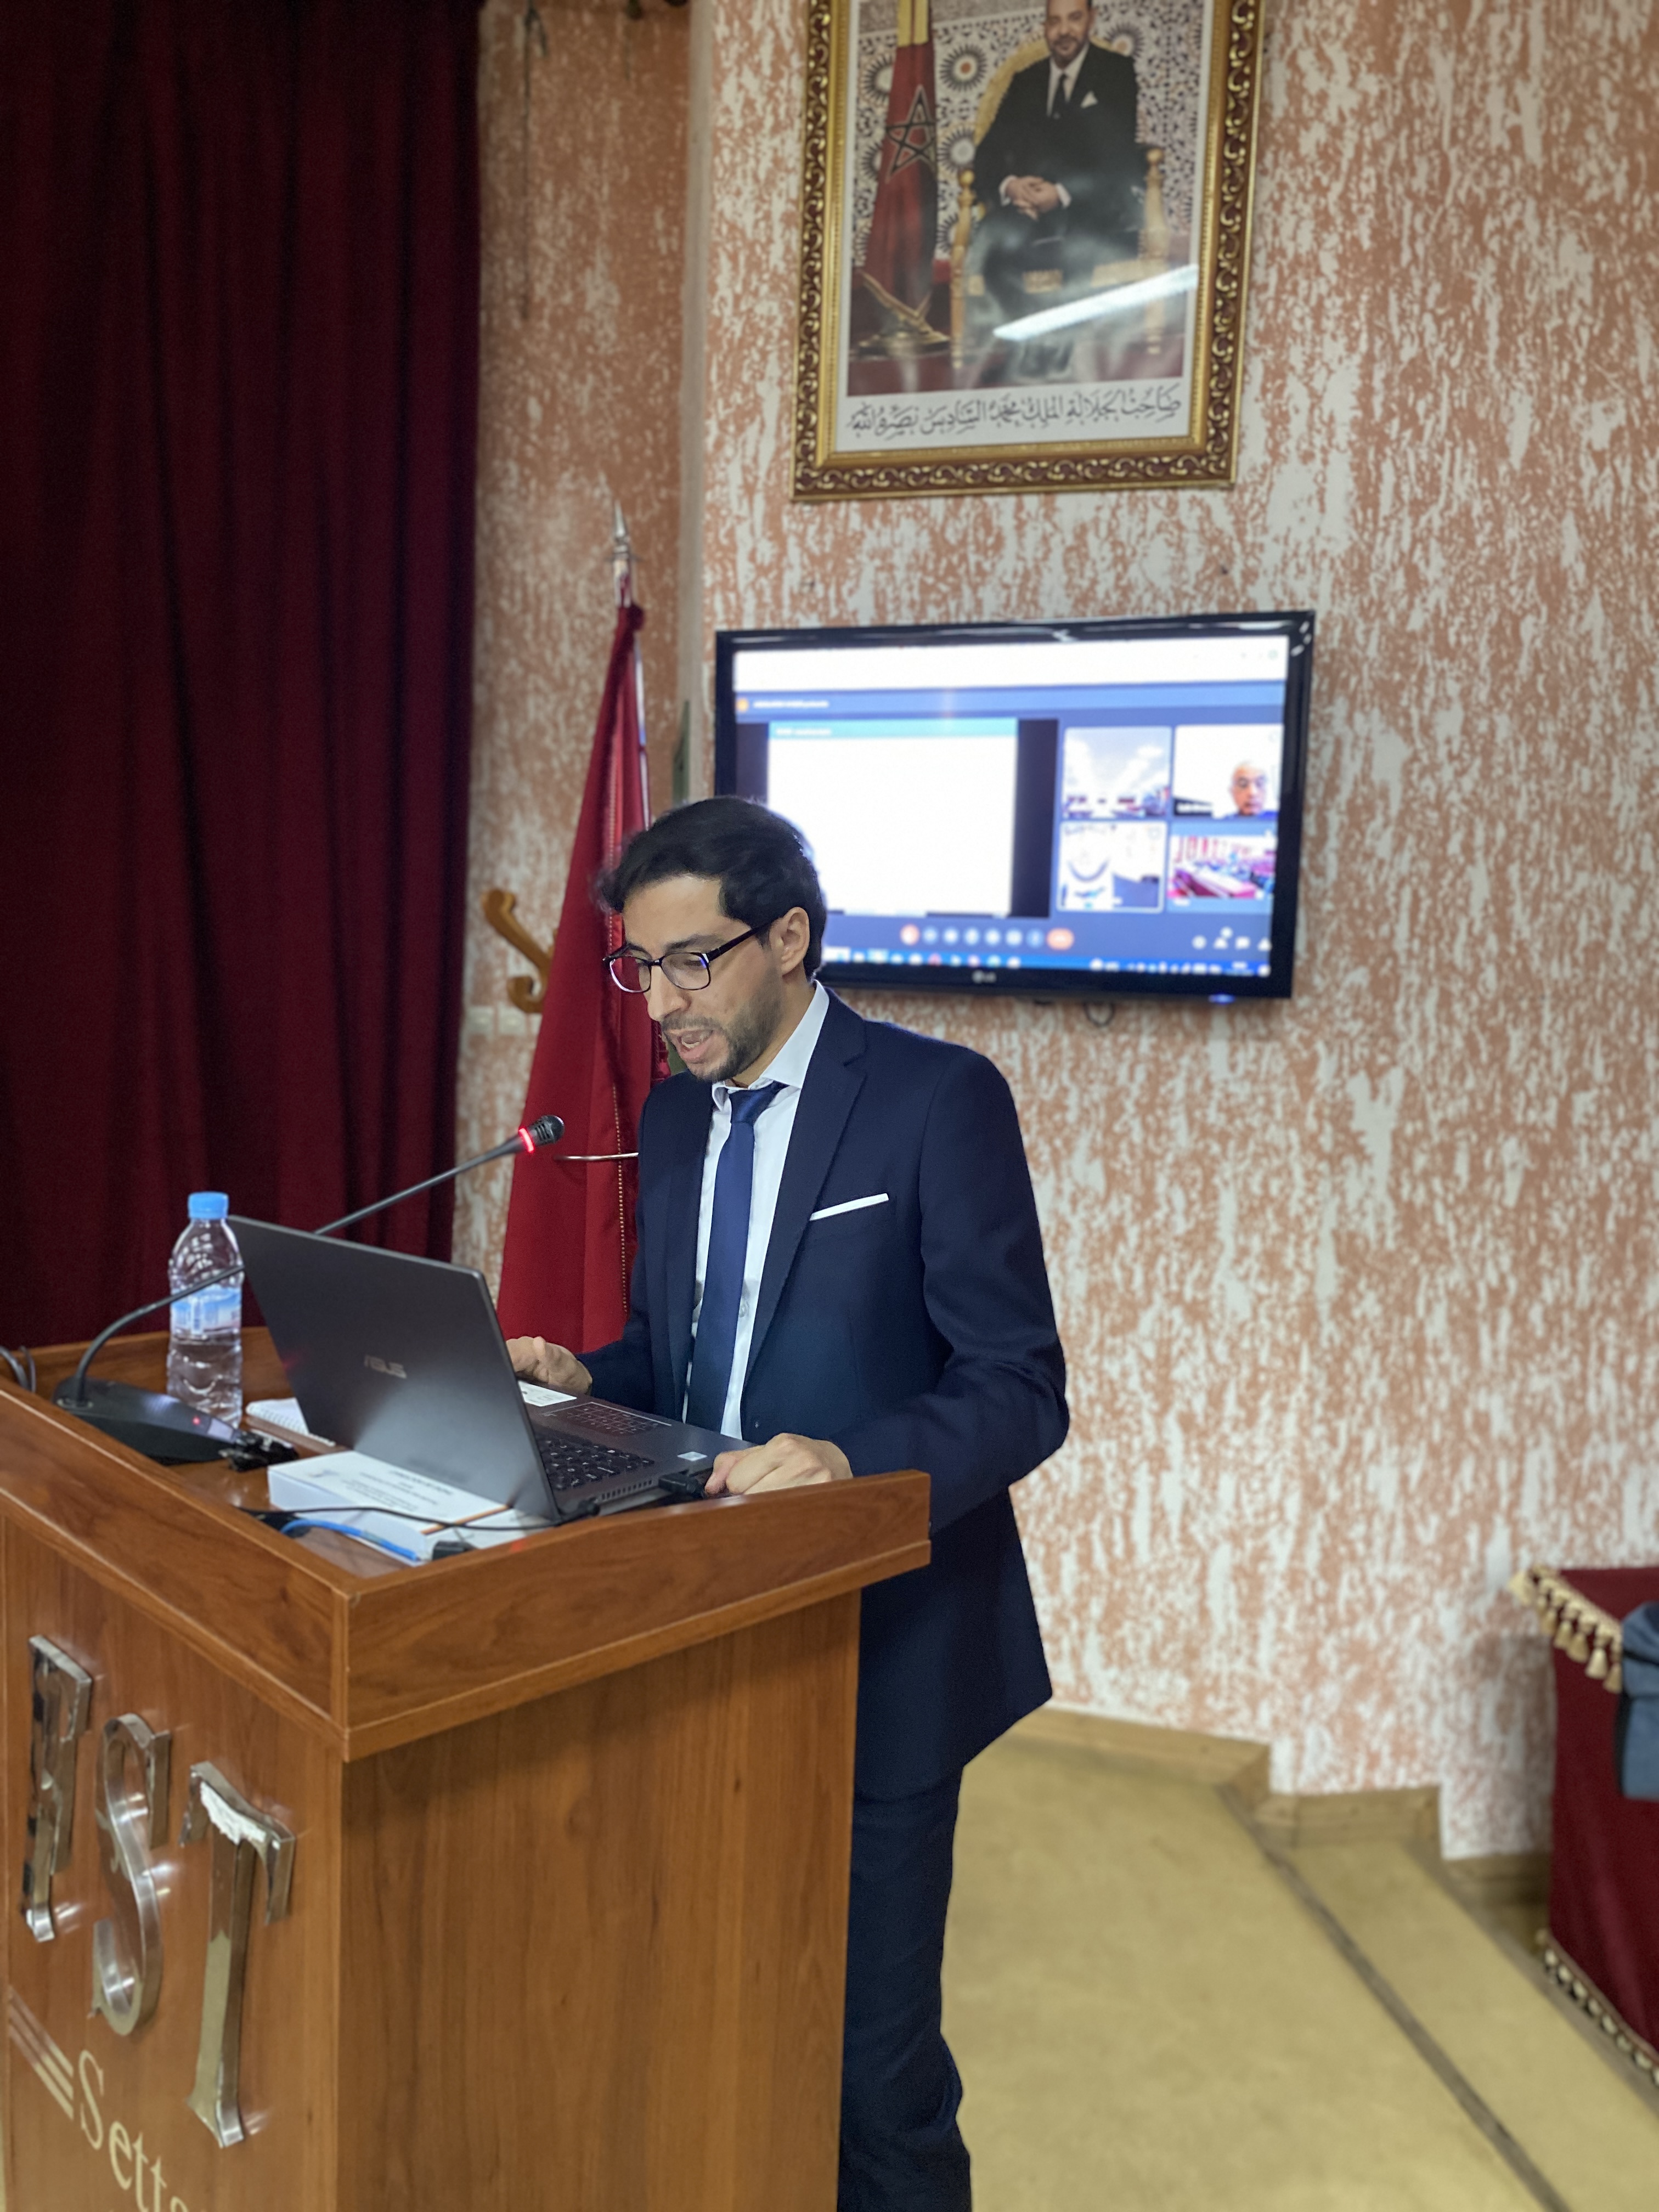 Thesis defense Hamid Taramit co-supervision Hassan I University of Morocco and UCLM